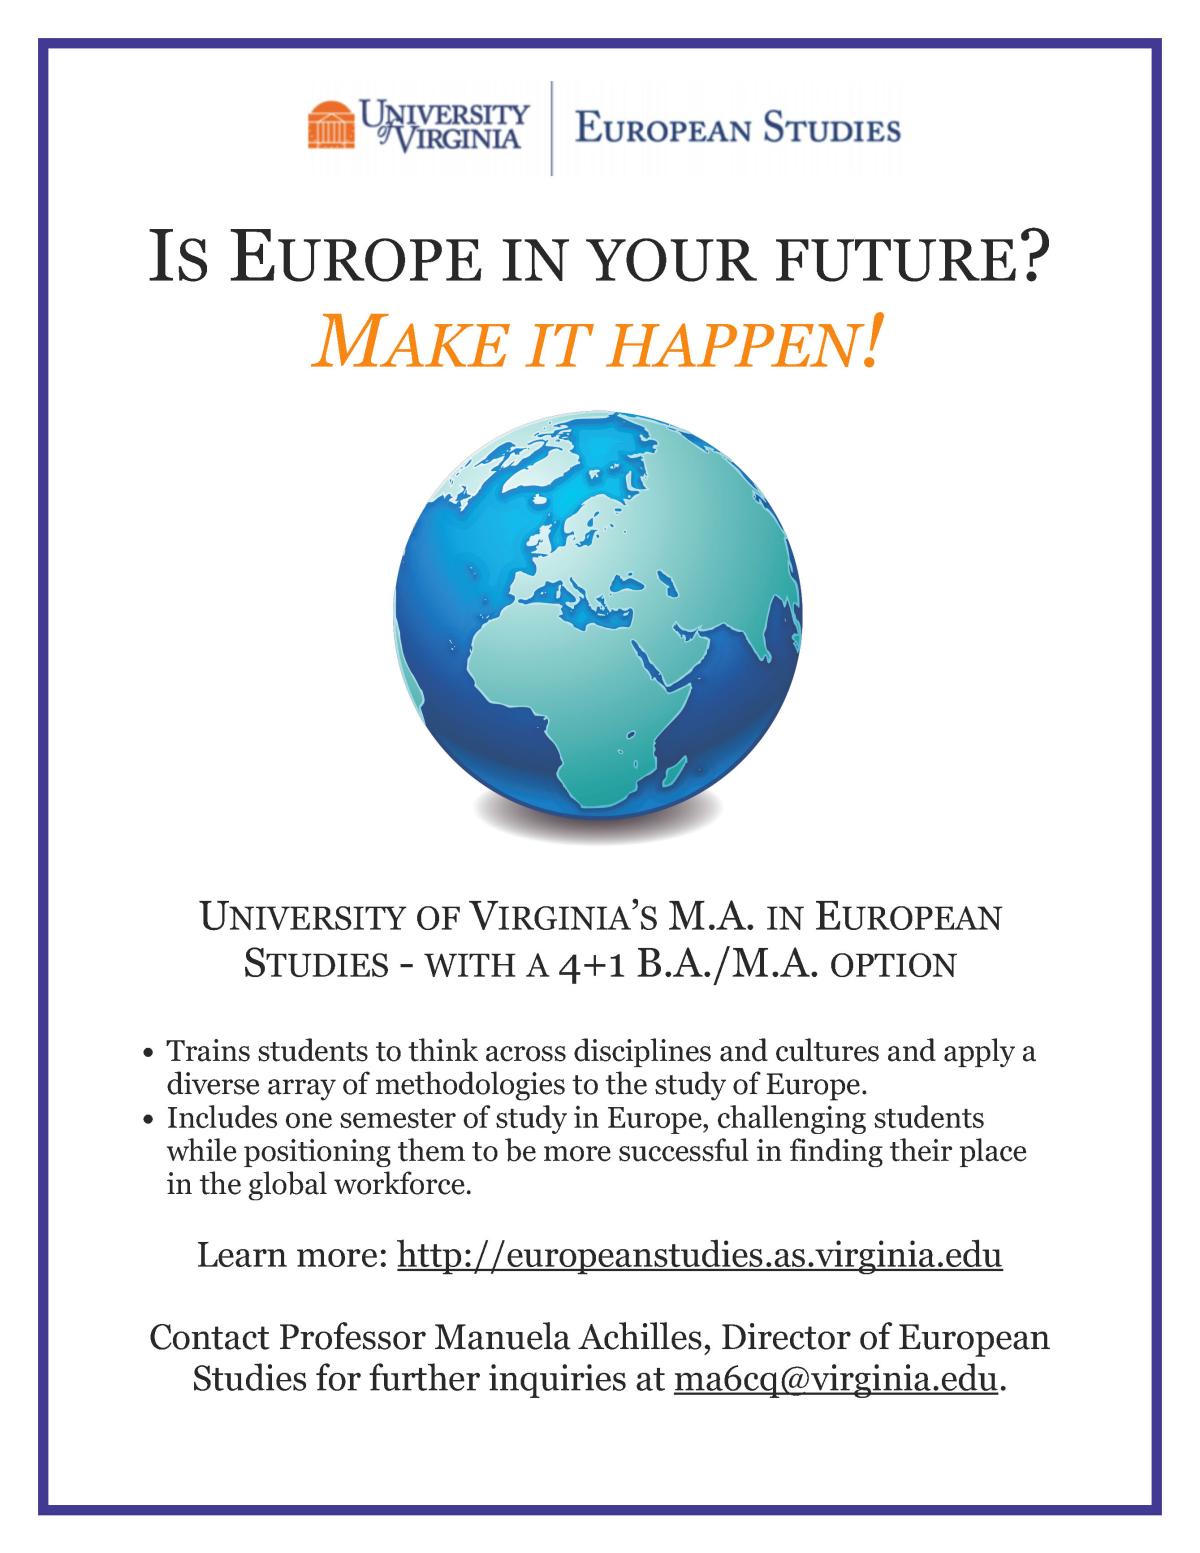 Is Europe In Your Future flyer